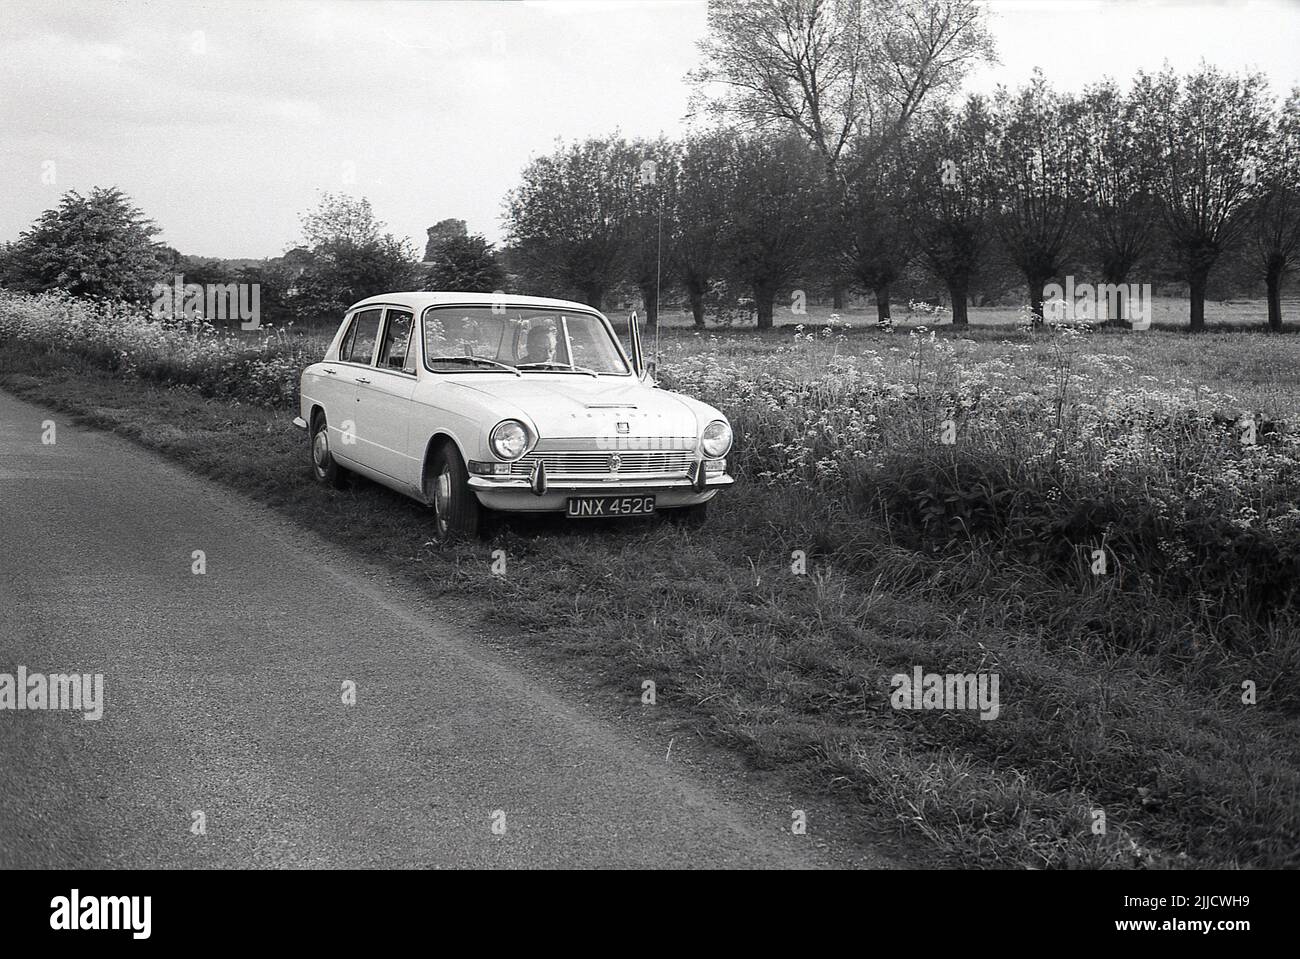 1970s, historical, a gentleman sitting in the passenger seat ot a Triumph Dolomite car of the era, parked on a grassy verge beside a rural road, England, UK. A small saloon car, the Triumph Dolomite was made by the Tiumph Motor Company which was a part of the hugh British Leyland Corporation (BL. The car was produced in Canley, Coventry, between 1972 and 1980. Stock Photo